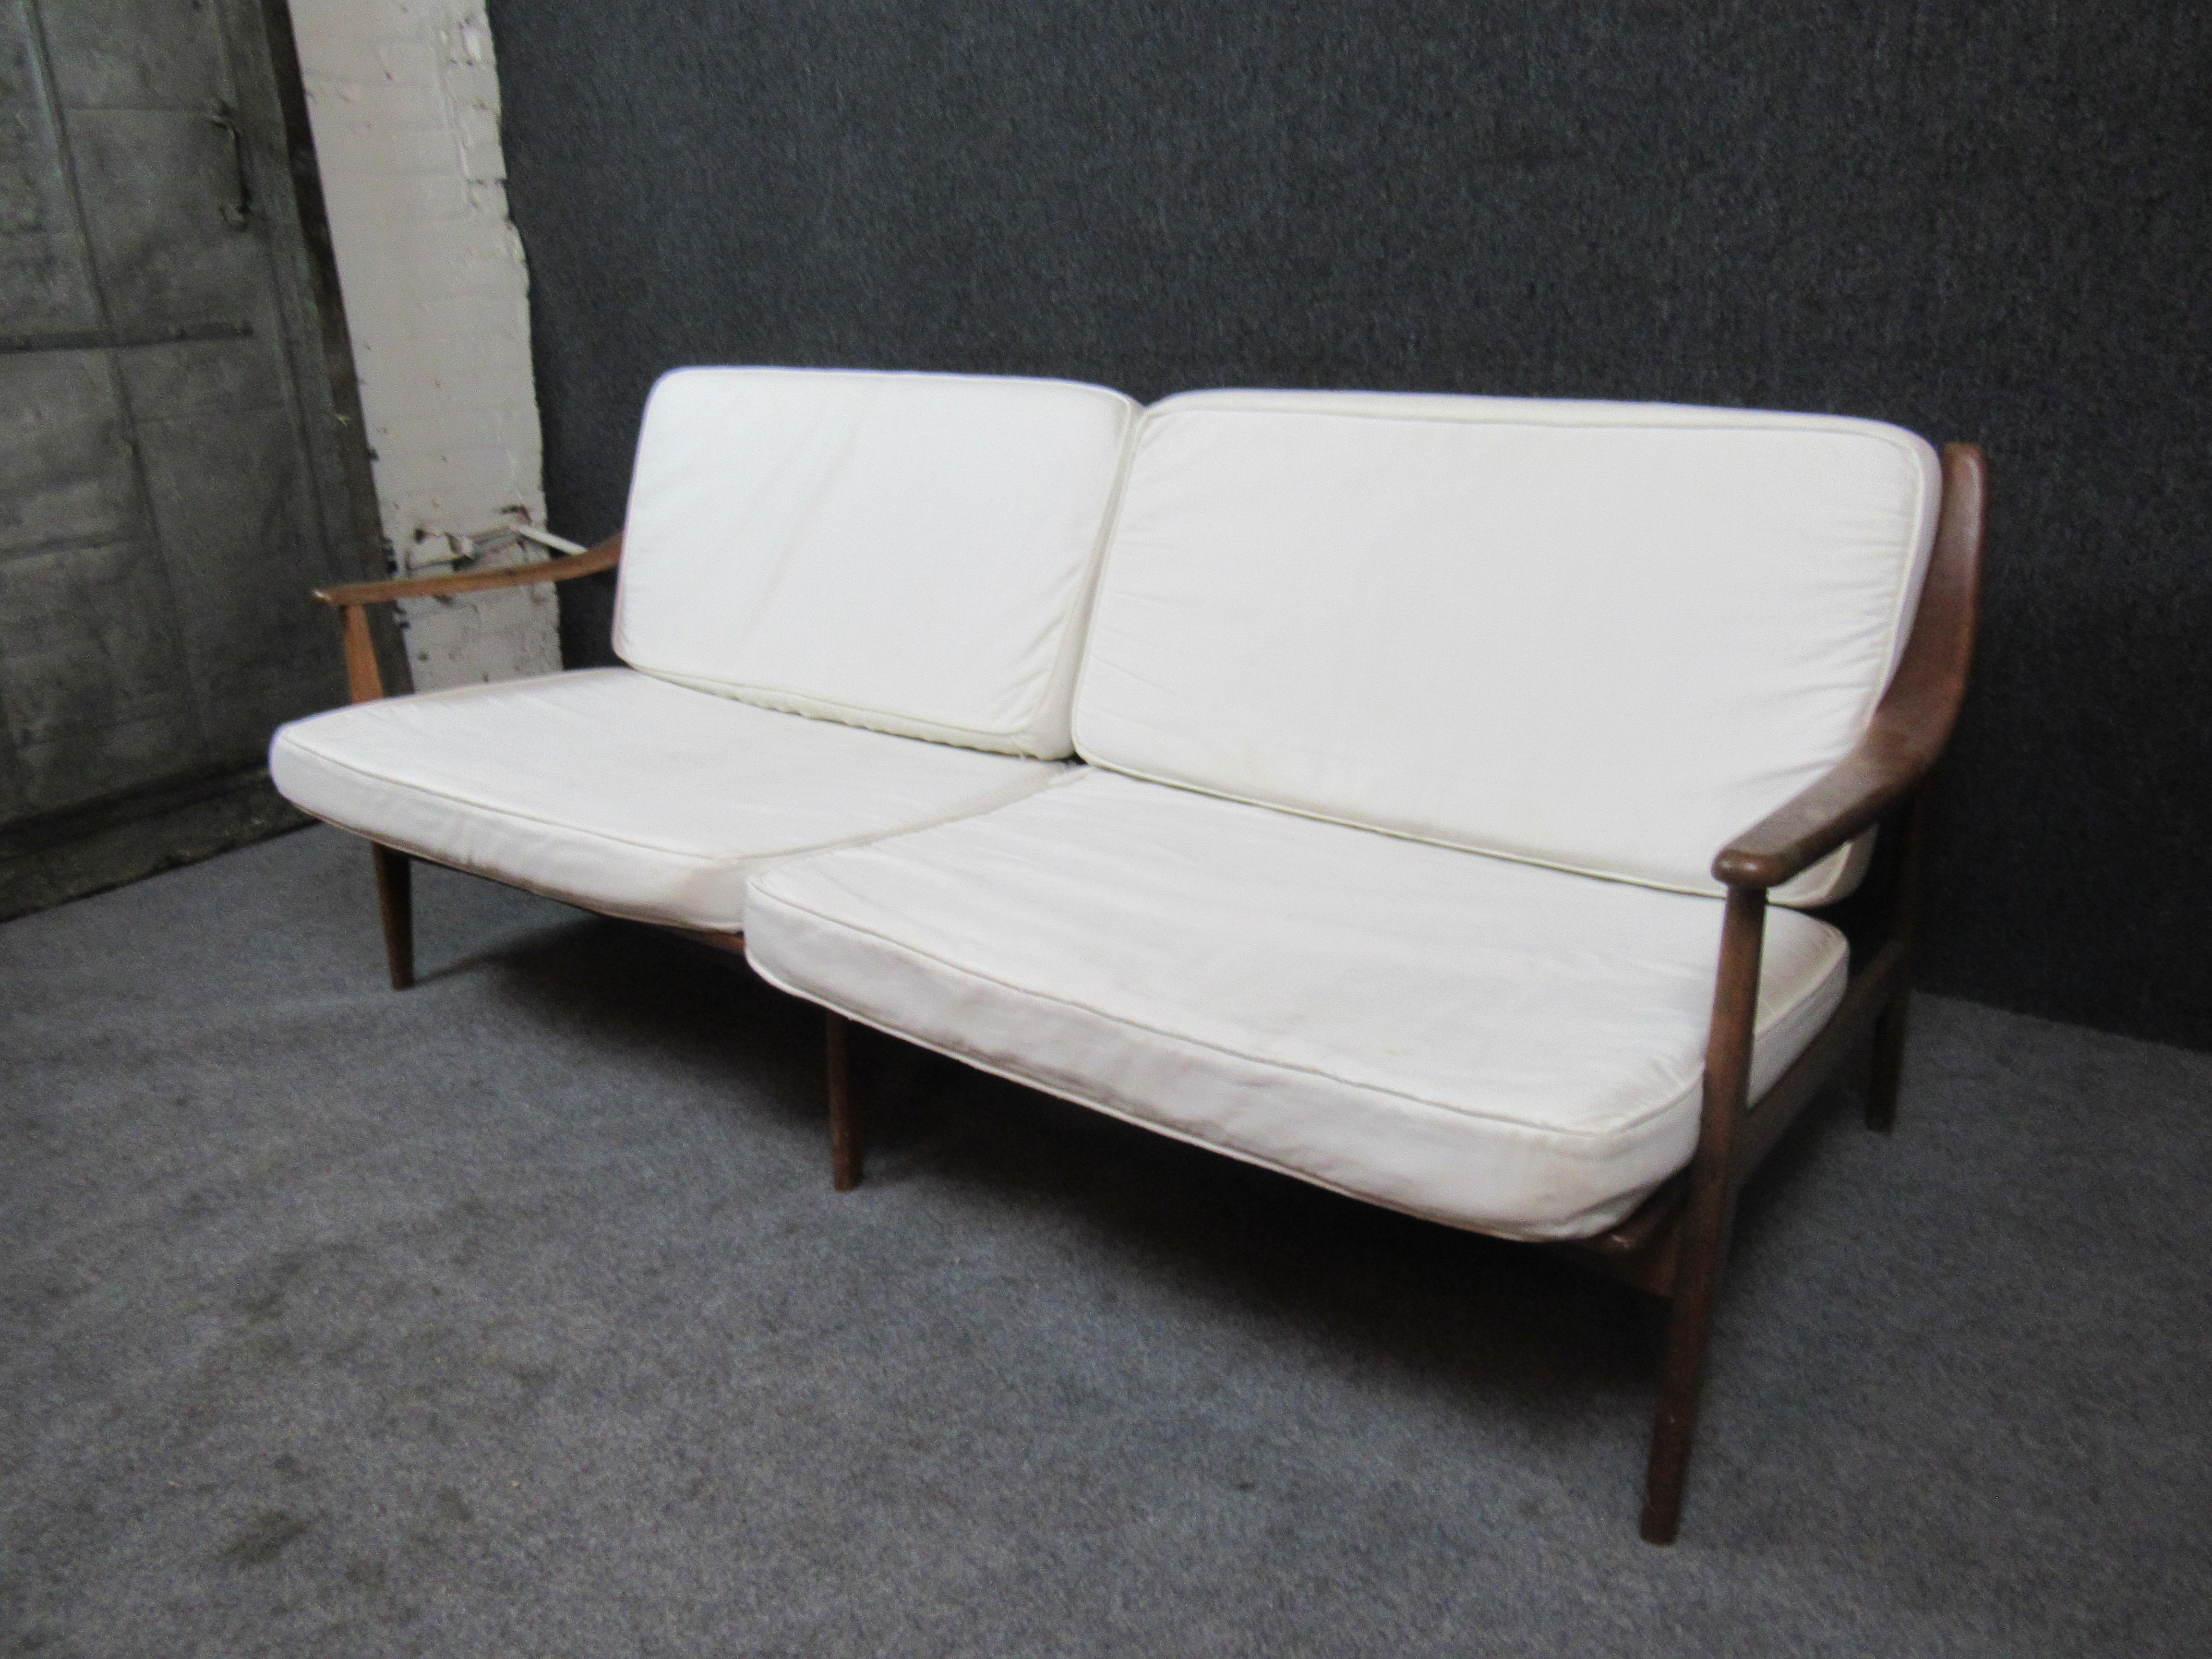 Bring home authentic Scandinavian midcentury design with this charming carved sofa. Borrowing influence from the timeless designs of artists such as Peter Hvidt and Finn Juhl, this minimalist settee features gently sloping arm rests, an attractive